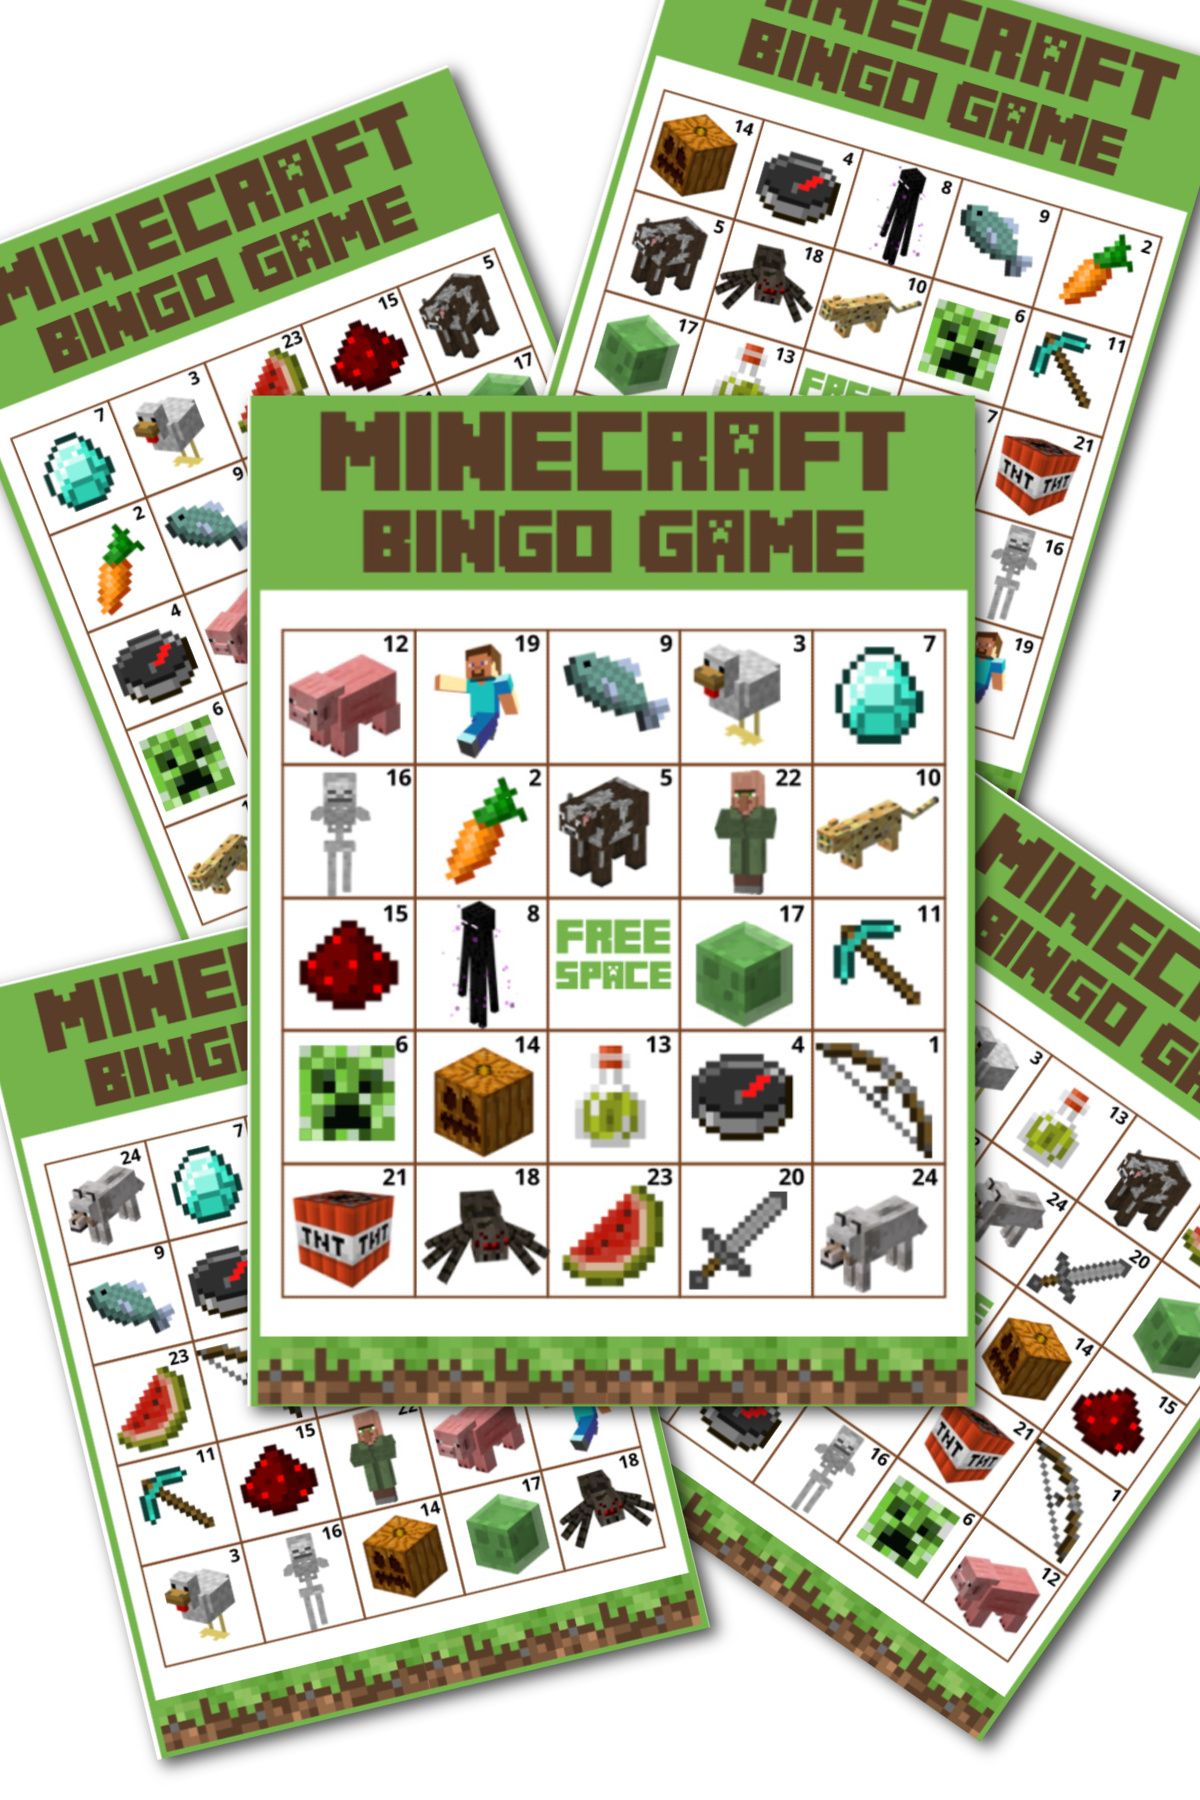 Download Our FREE Minecraft Printable Bingo Game Now!